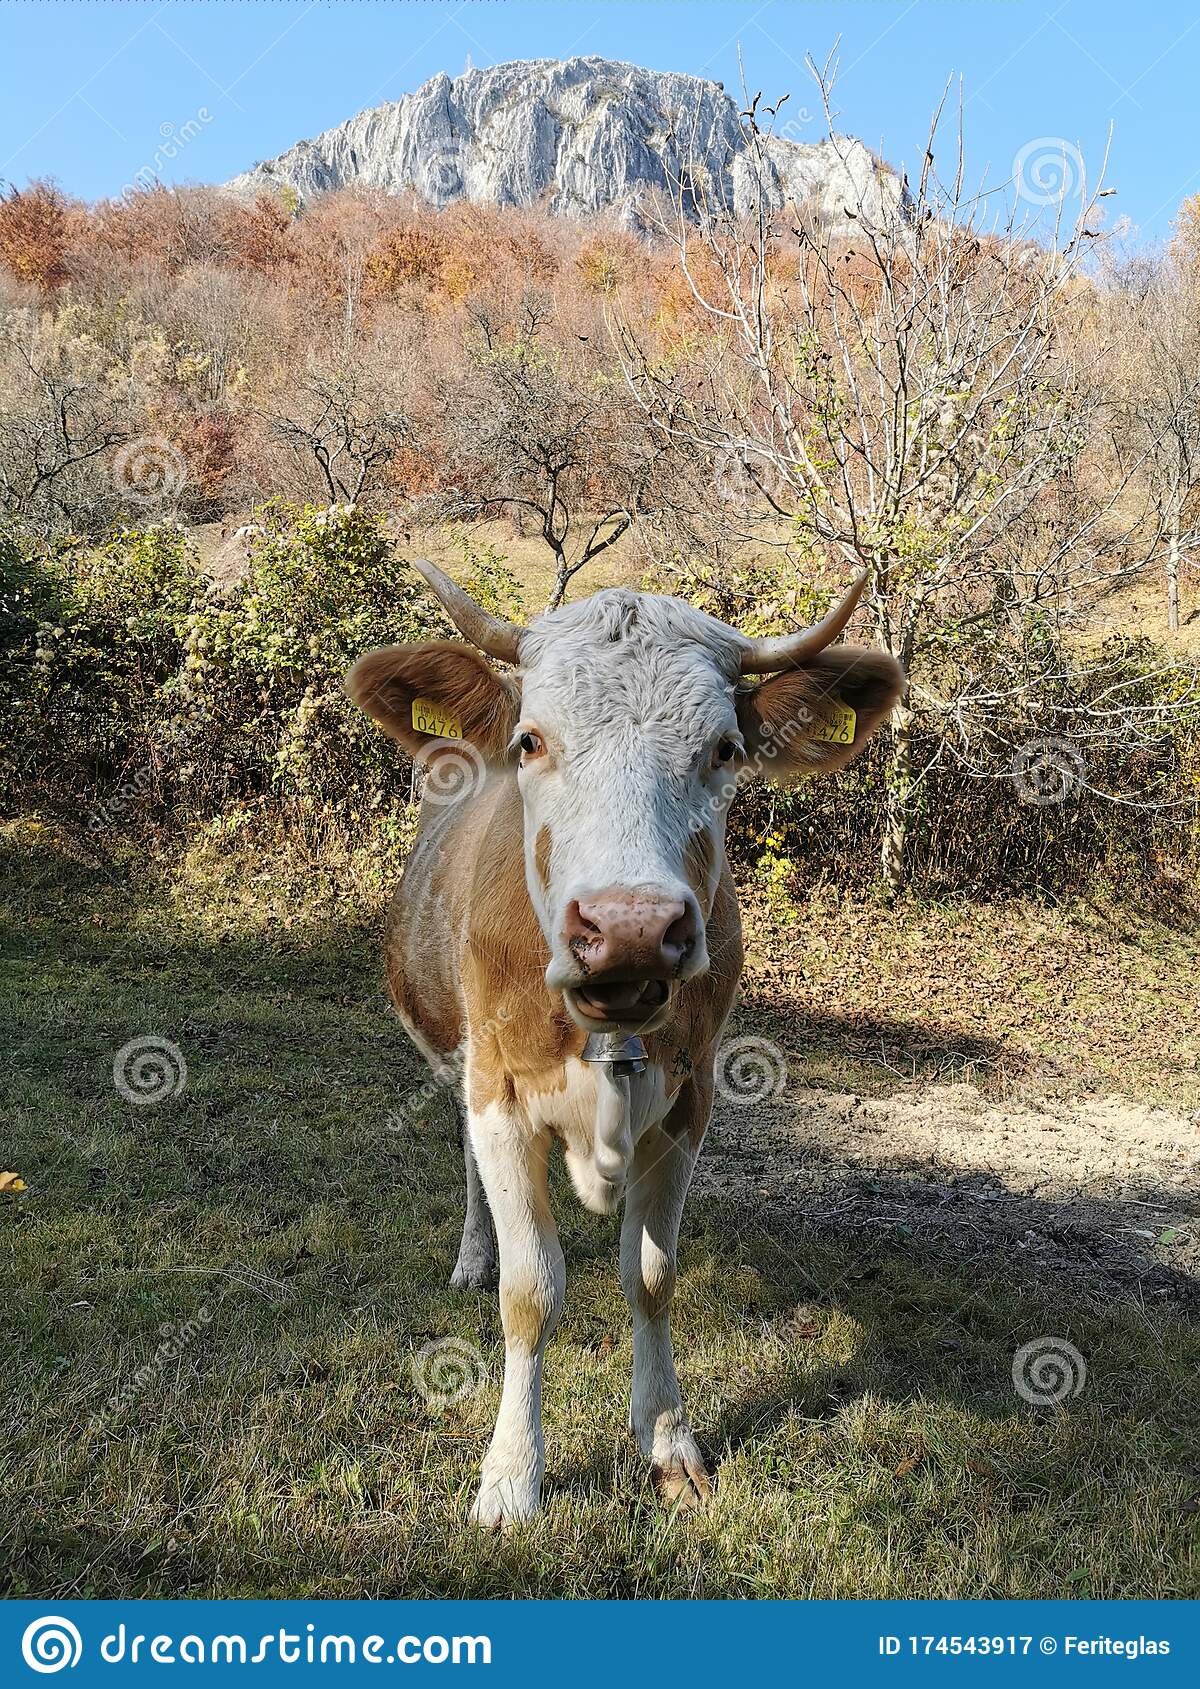 Why is the cow associated with peace?